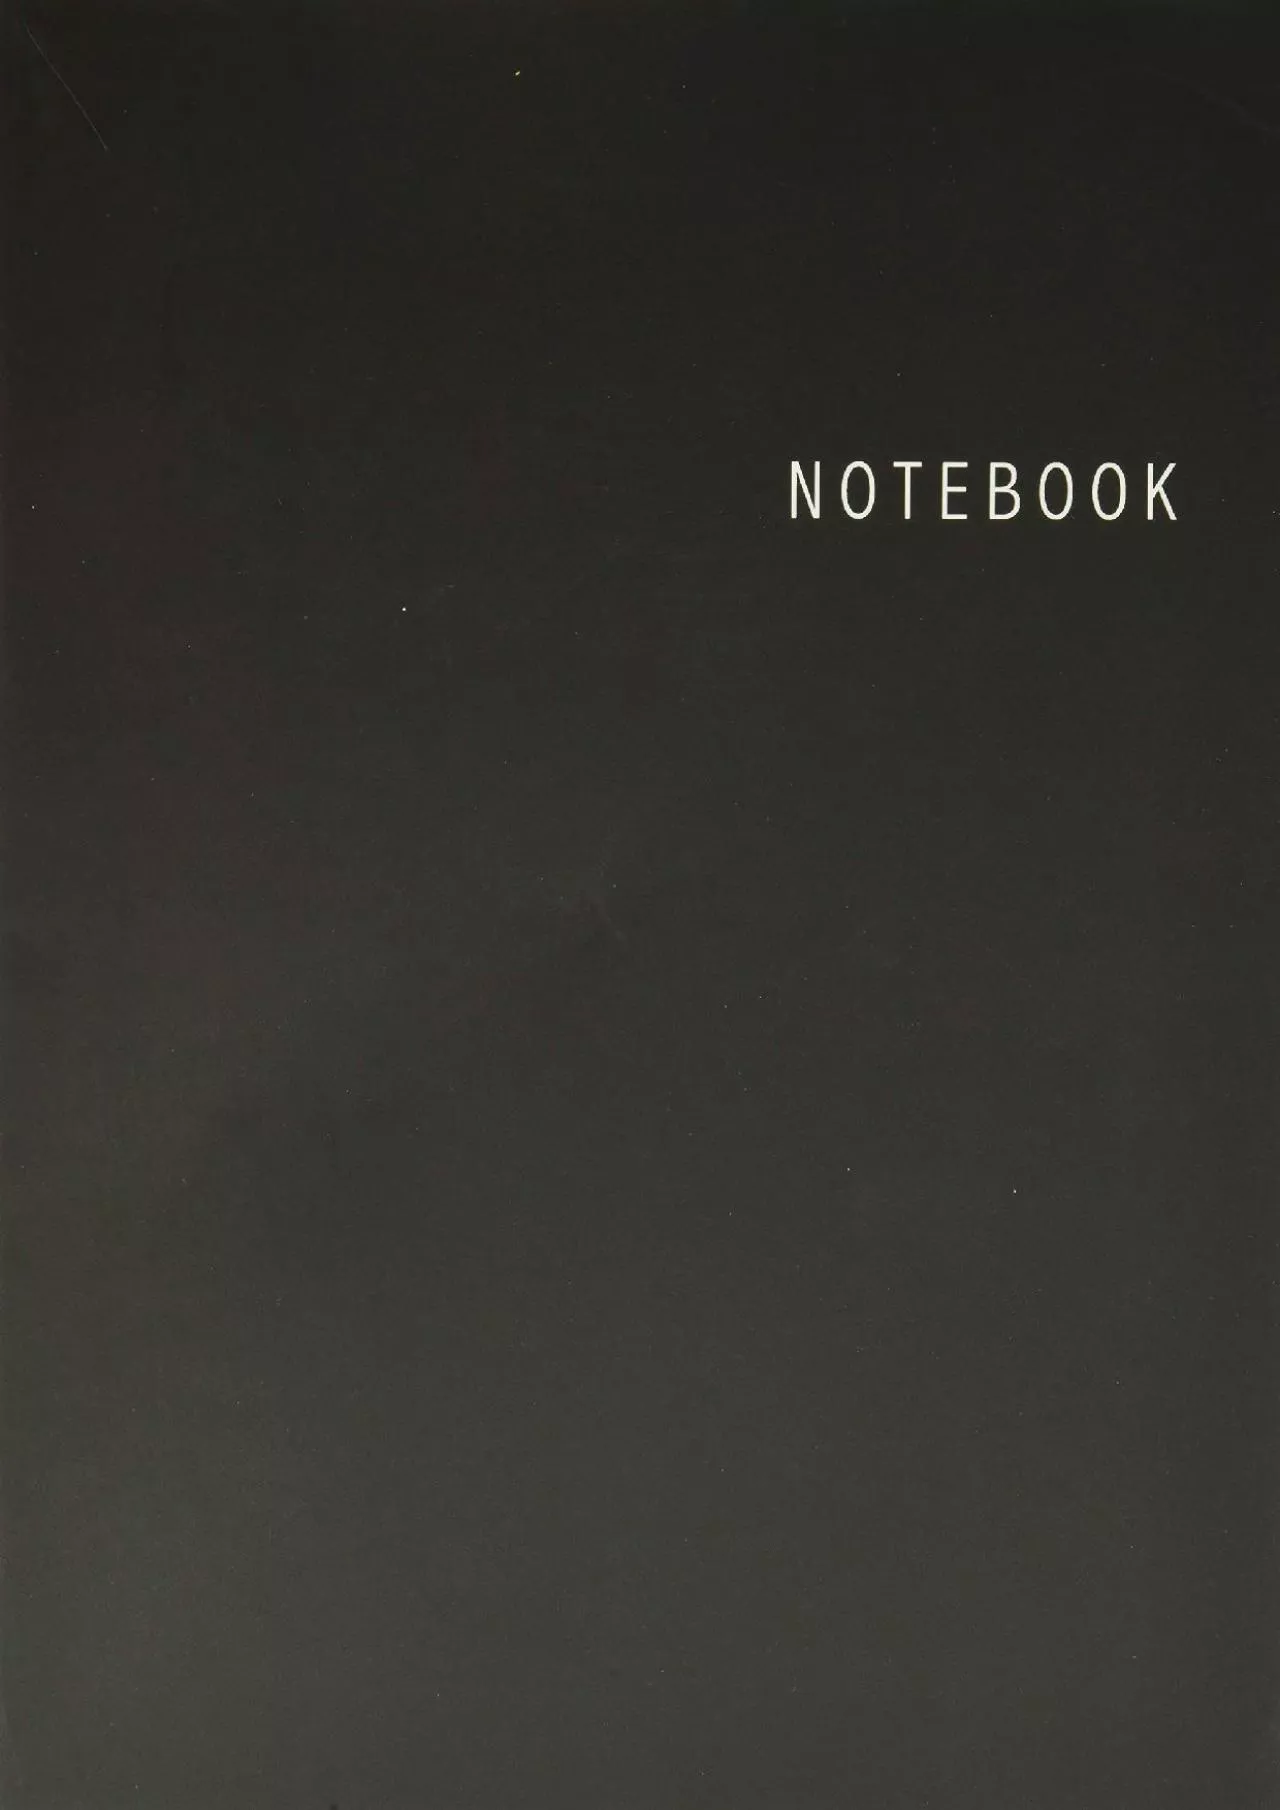 [DOWNLOAD] Notebook: Unlined Notebook - Large 8.5 x 11 inches - 100 Pages - Black Cover